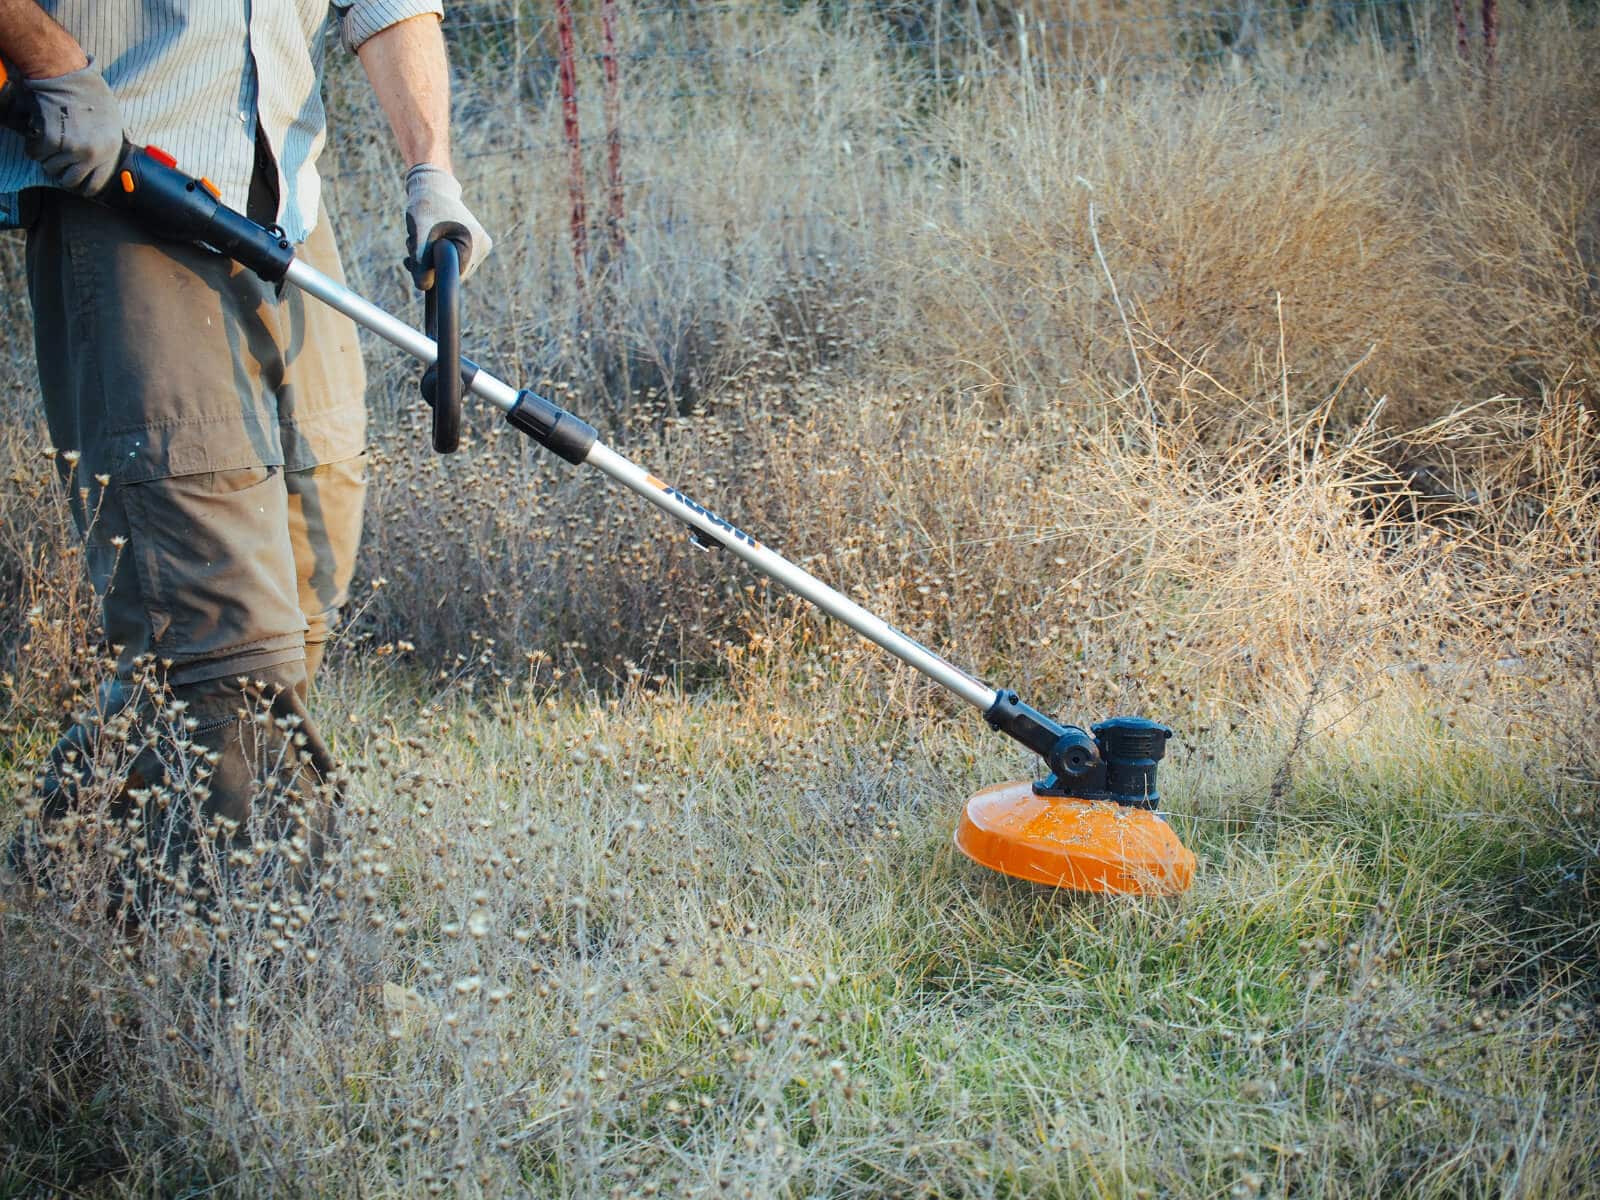 Using the WORX string trimmer to cut back our weeds